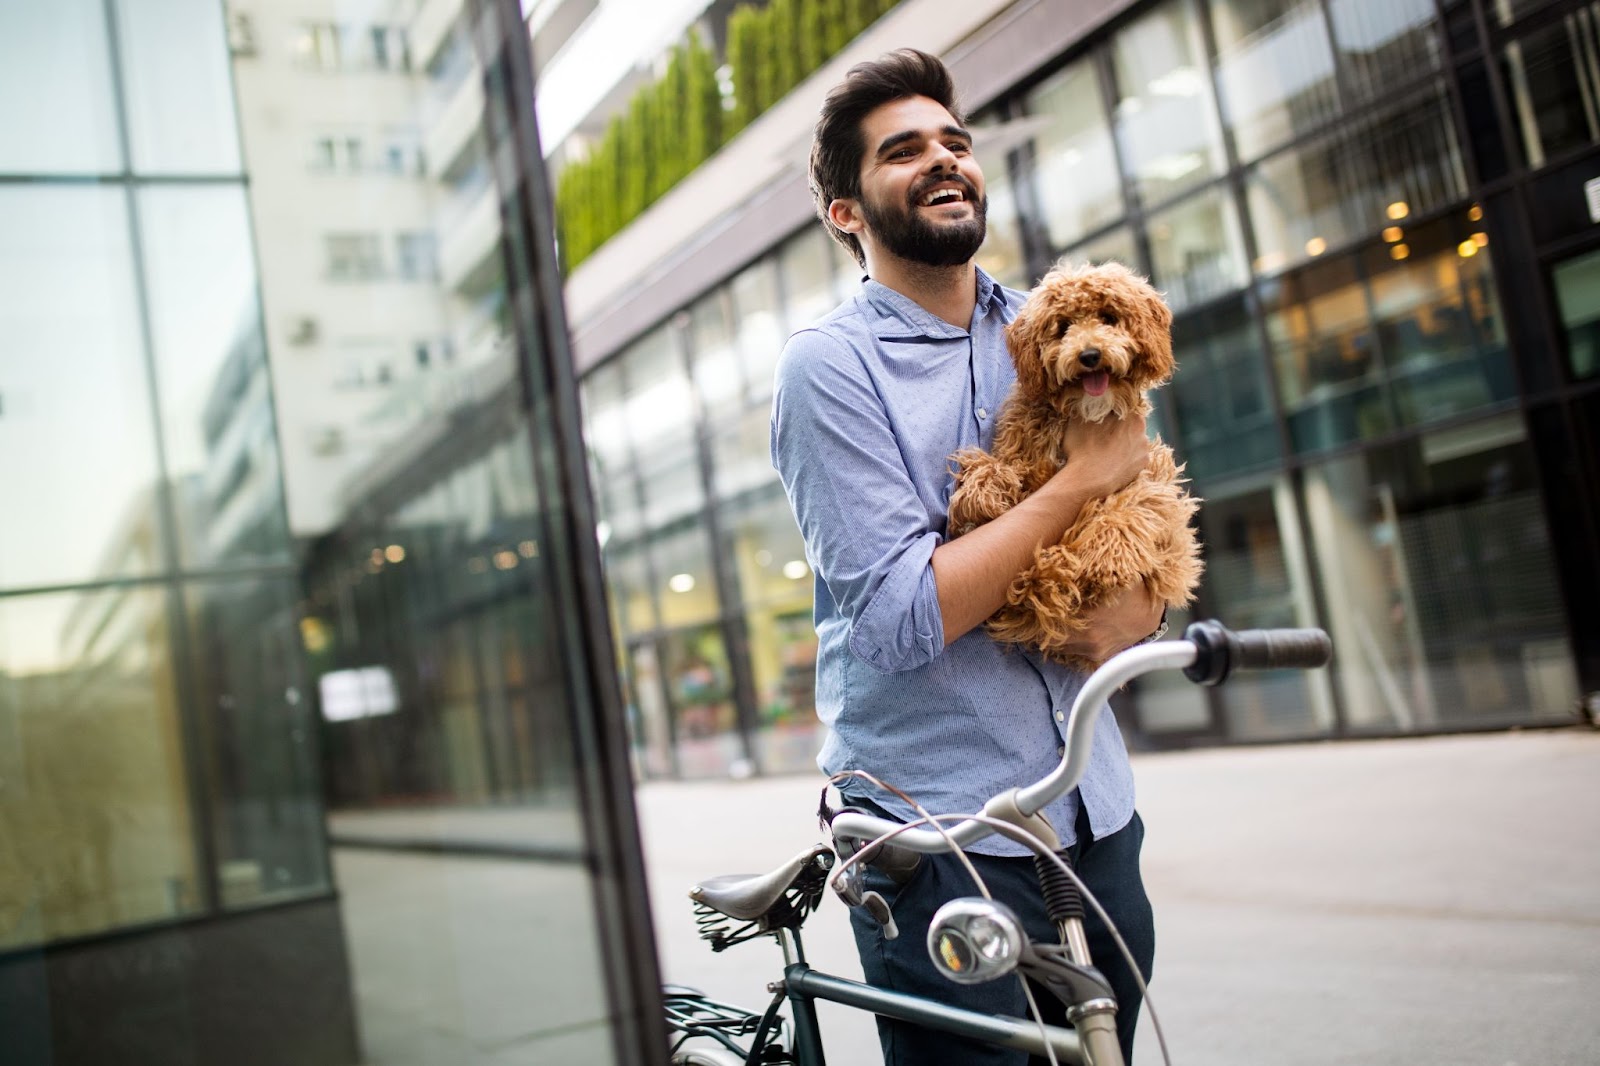 Exercise on the go without changing clothes: Young professional taking a short stroll outside of his office with his puppy